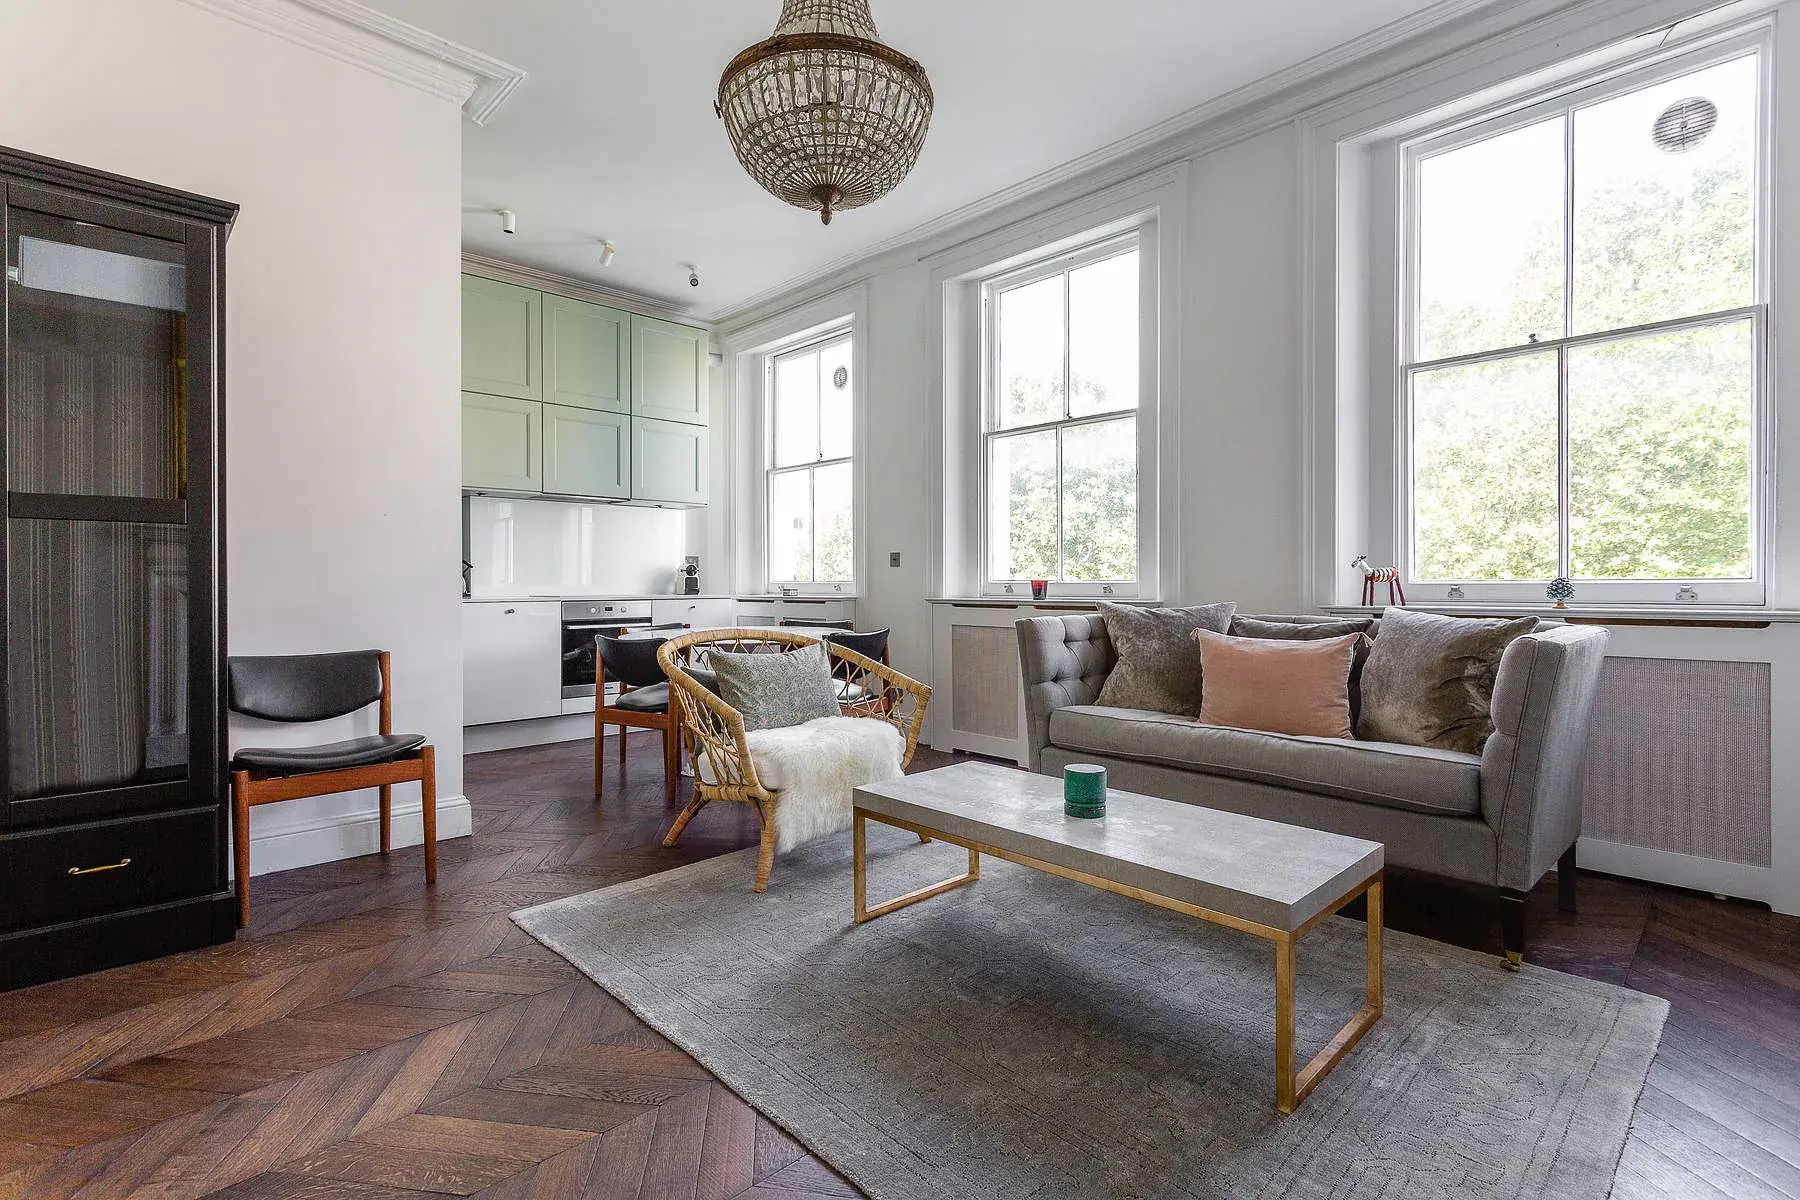 Onslow Gardens , holiday home in South Kensington, London